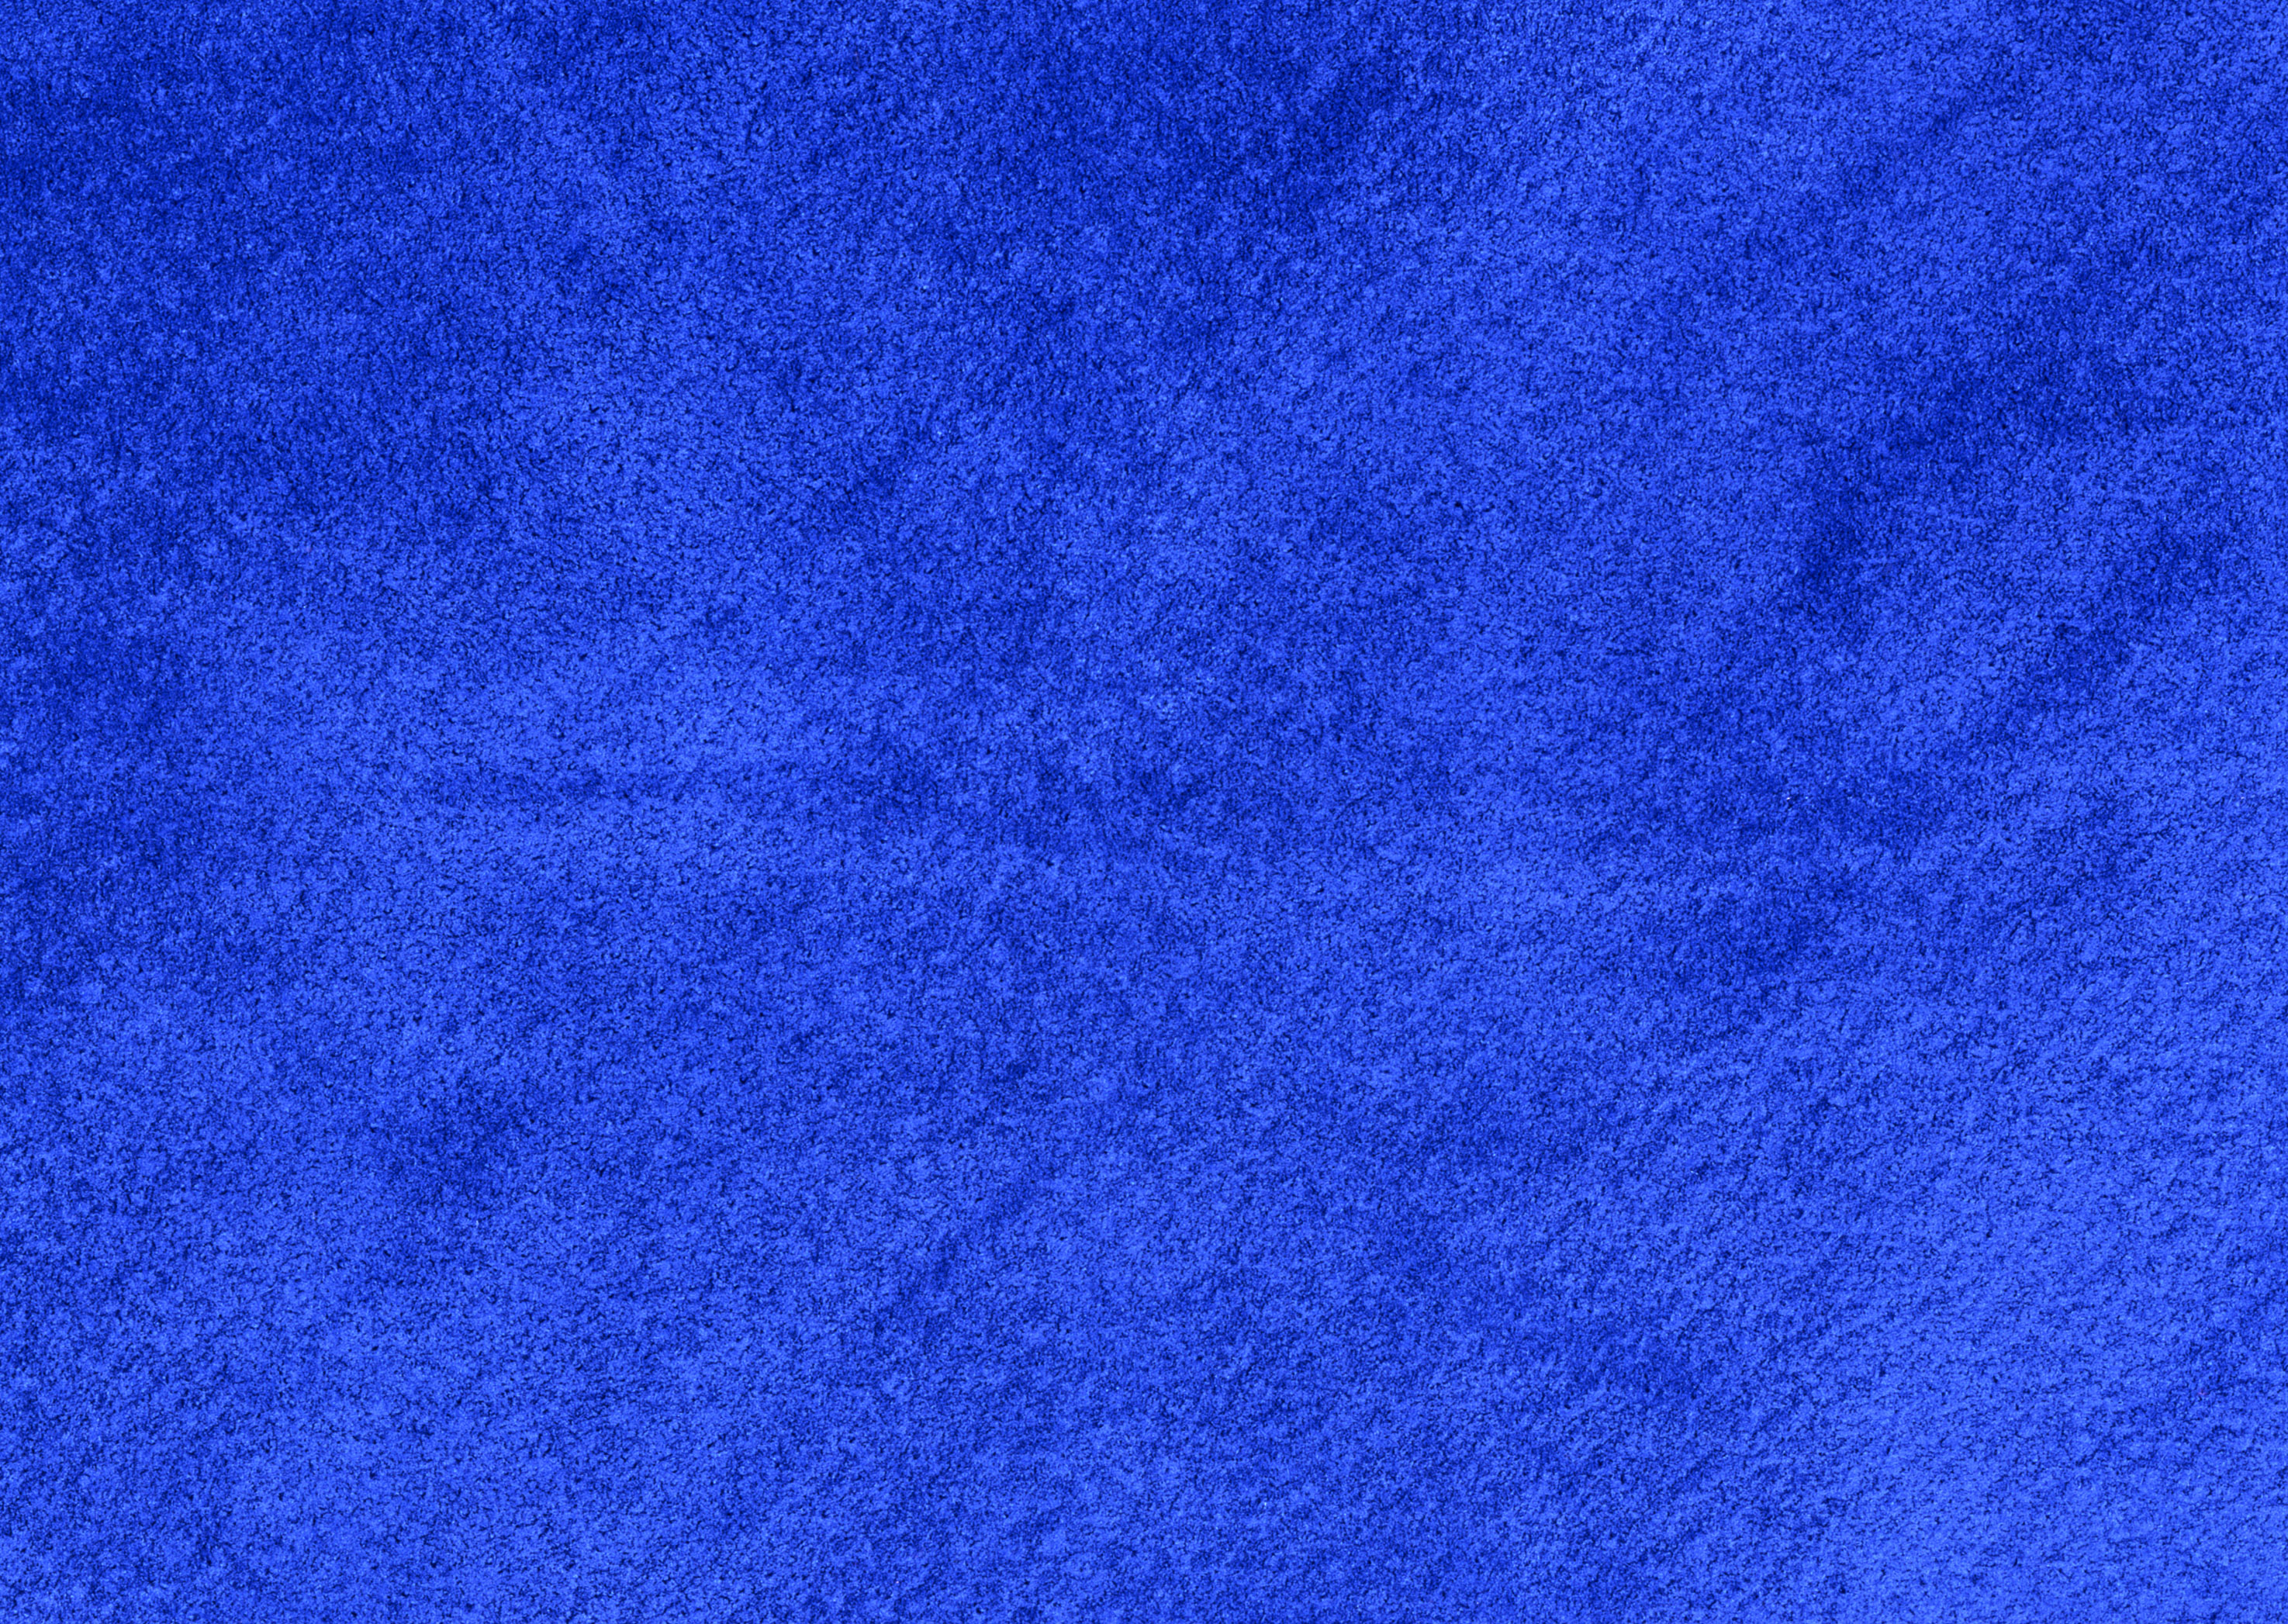 Blue leather big textures background image, free picture leather download